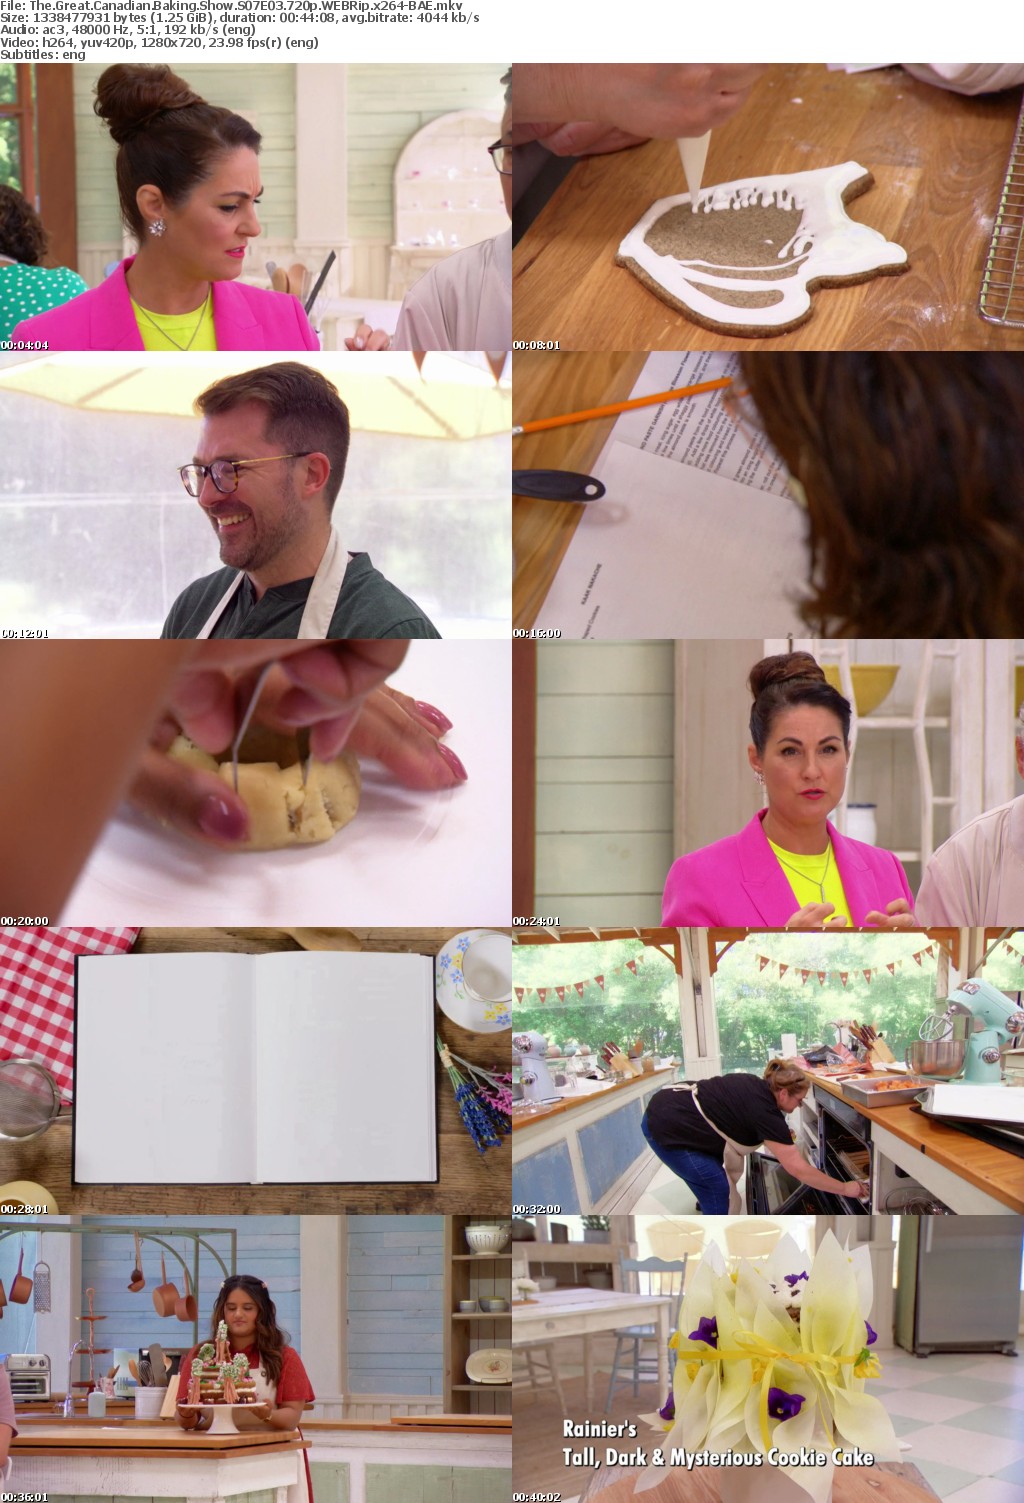 The Great Canadian Baking Show S07E03 720p WEBRip x264-BAE